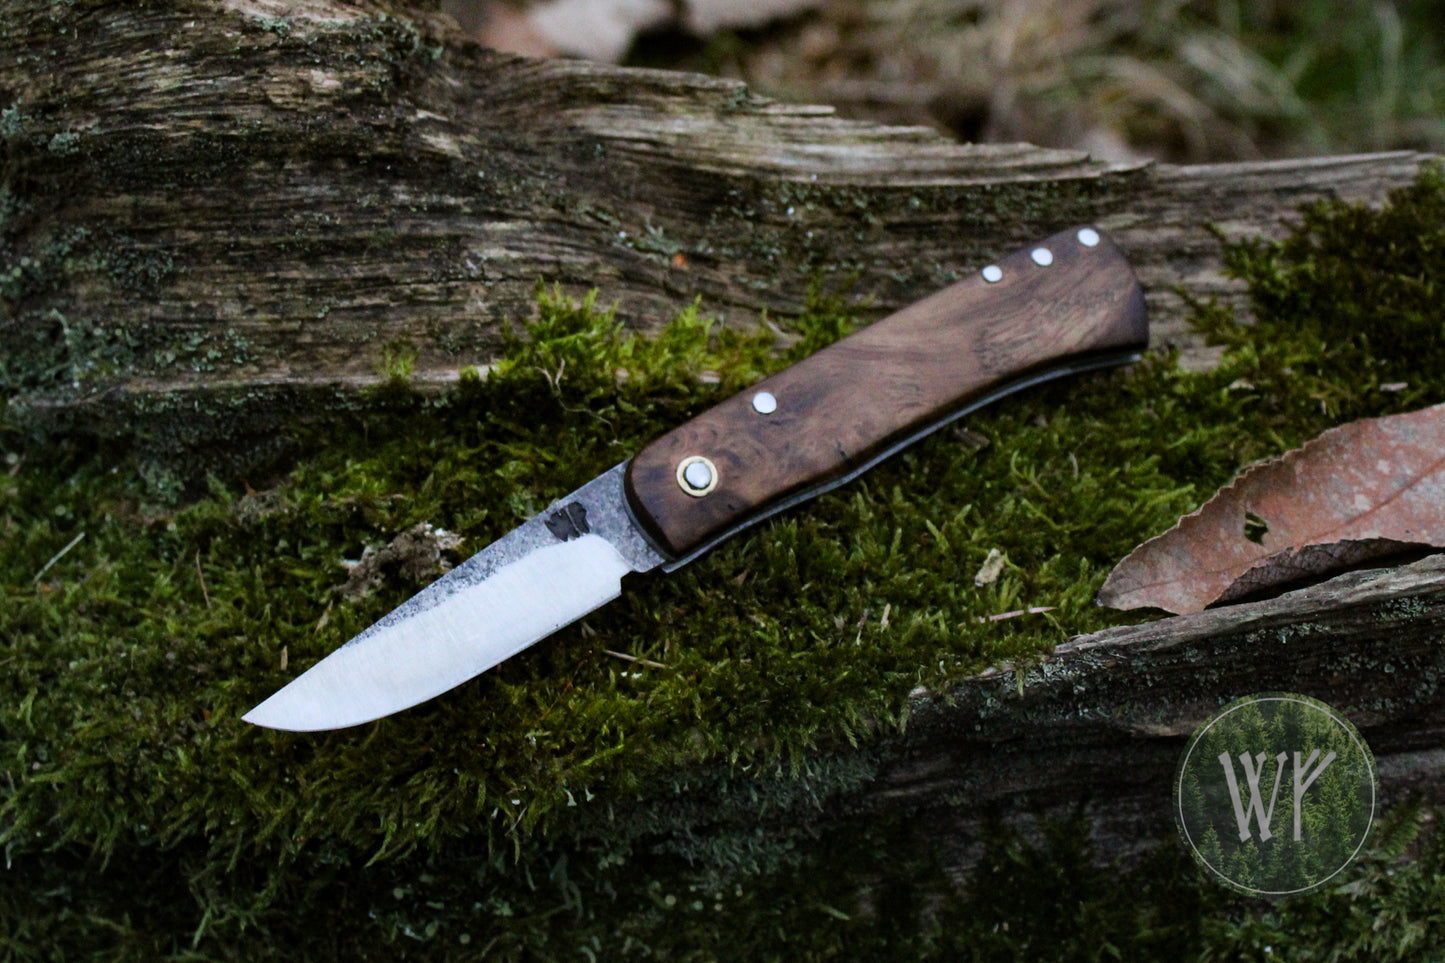 Hand-forged dual-detente folder with 1095 Carbon Steel blade, Titanium Liners and Scottish Oak Burr Handle / Non-locking UK Legal Carry